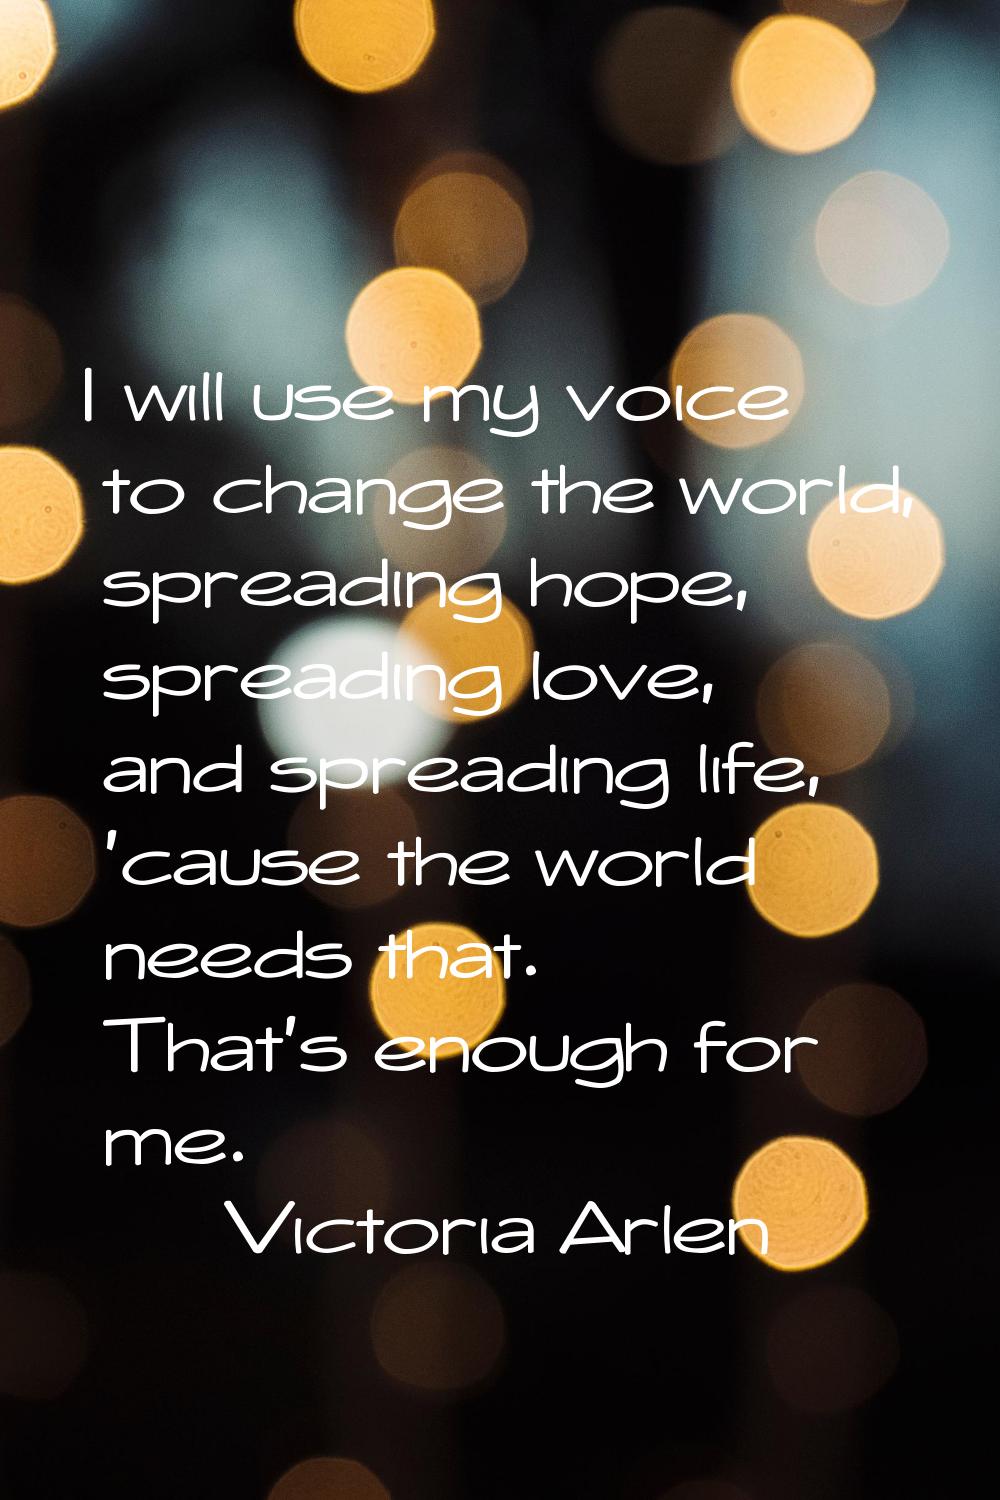 I will use my voice to change the world, spreading hope, spreading love, and spreading life, 'cause